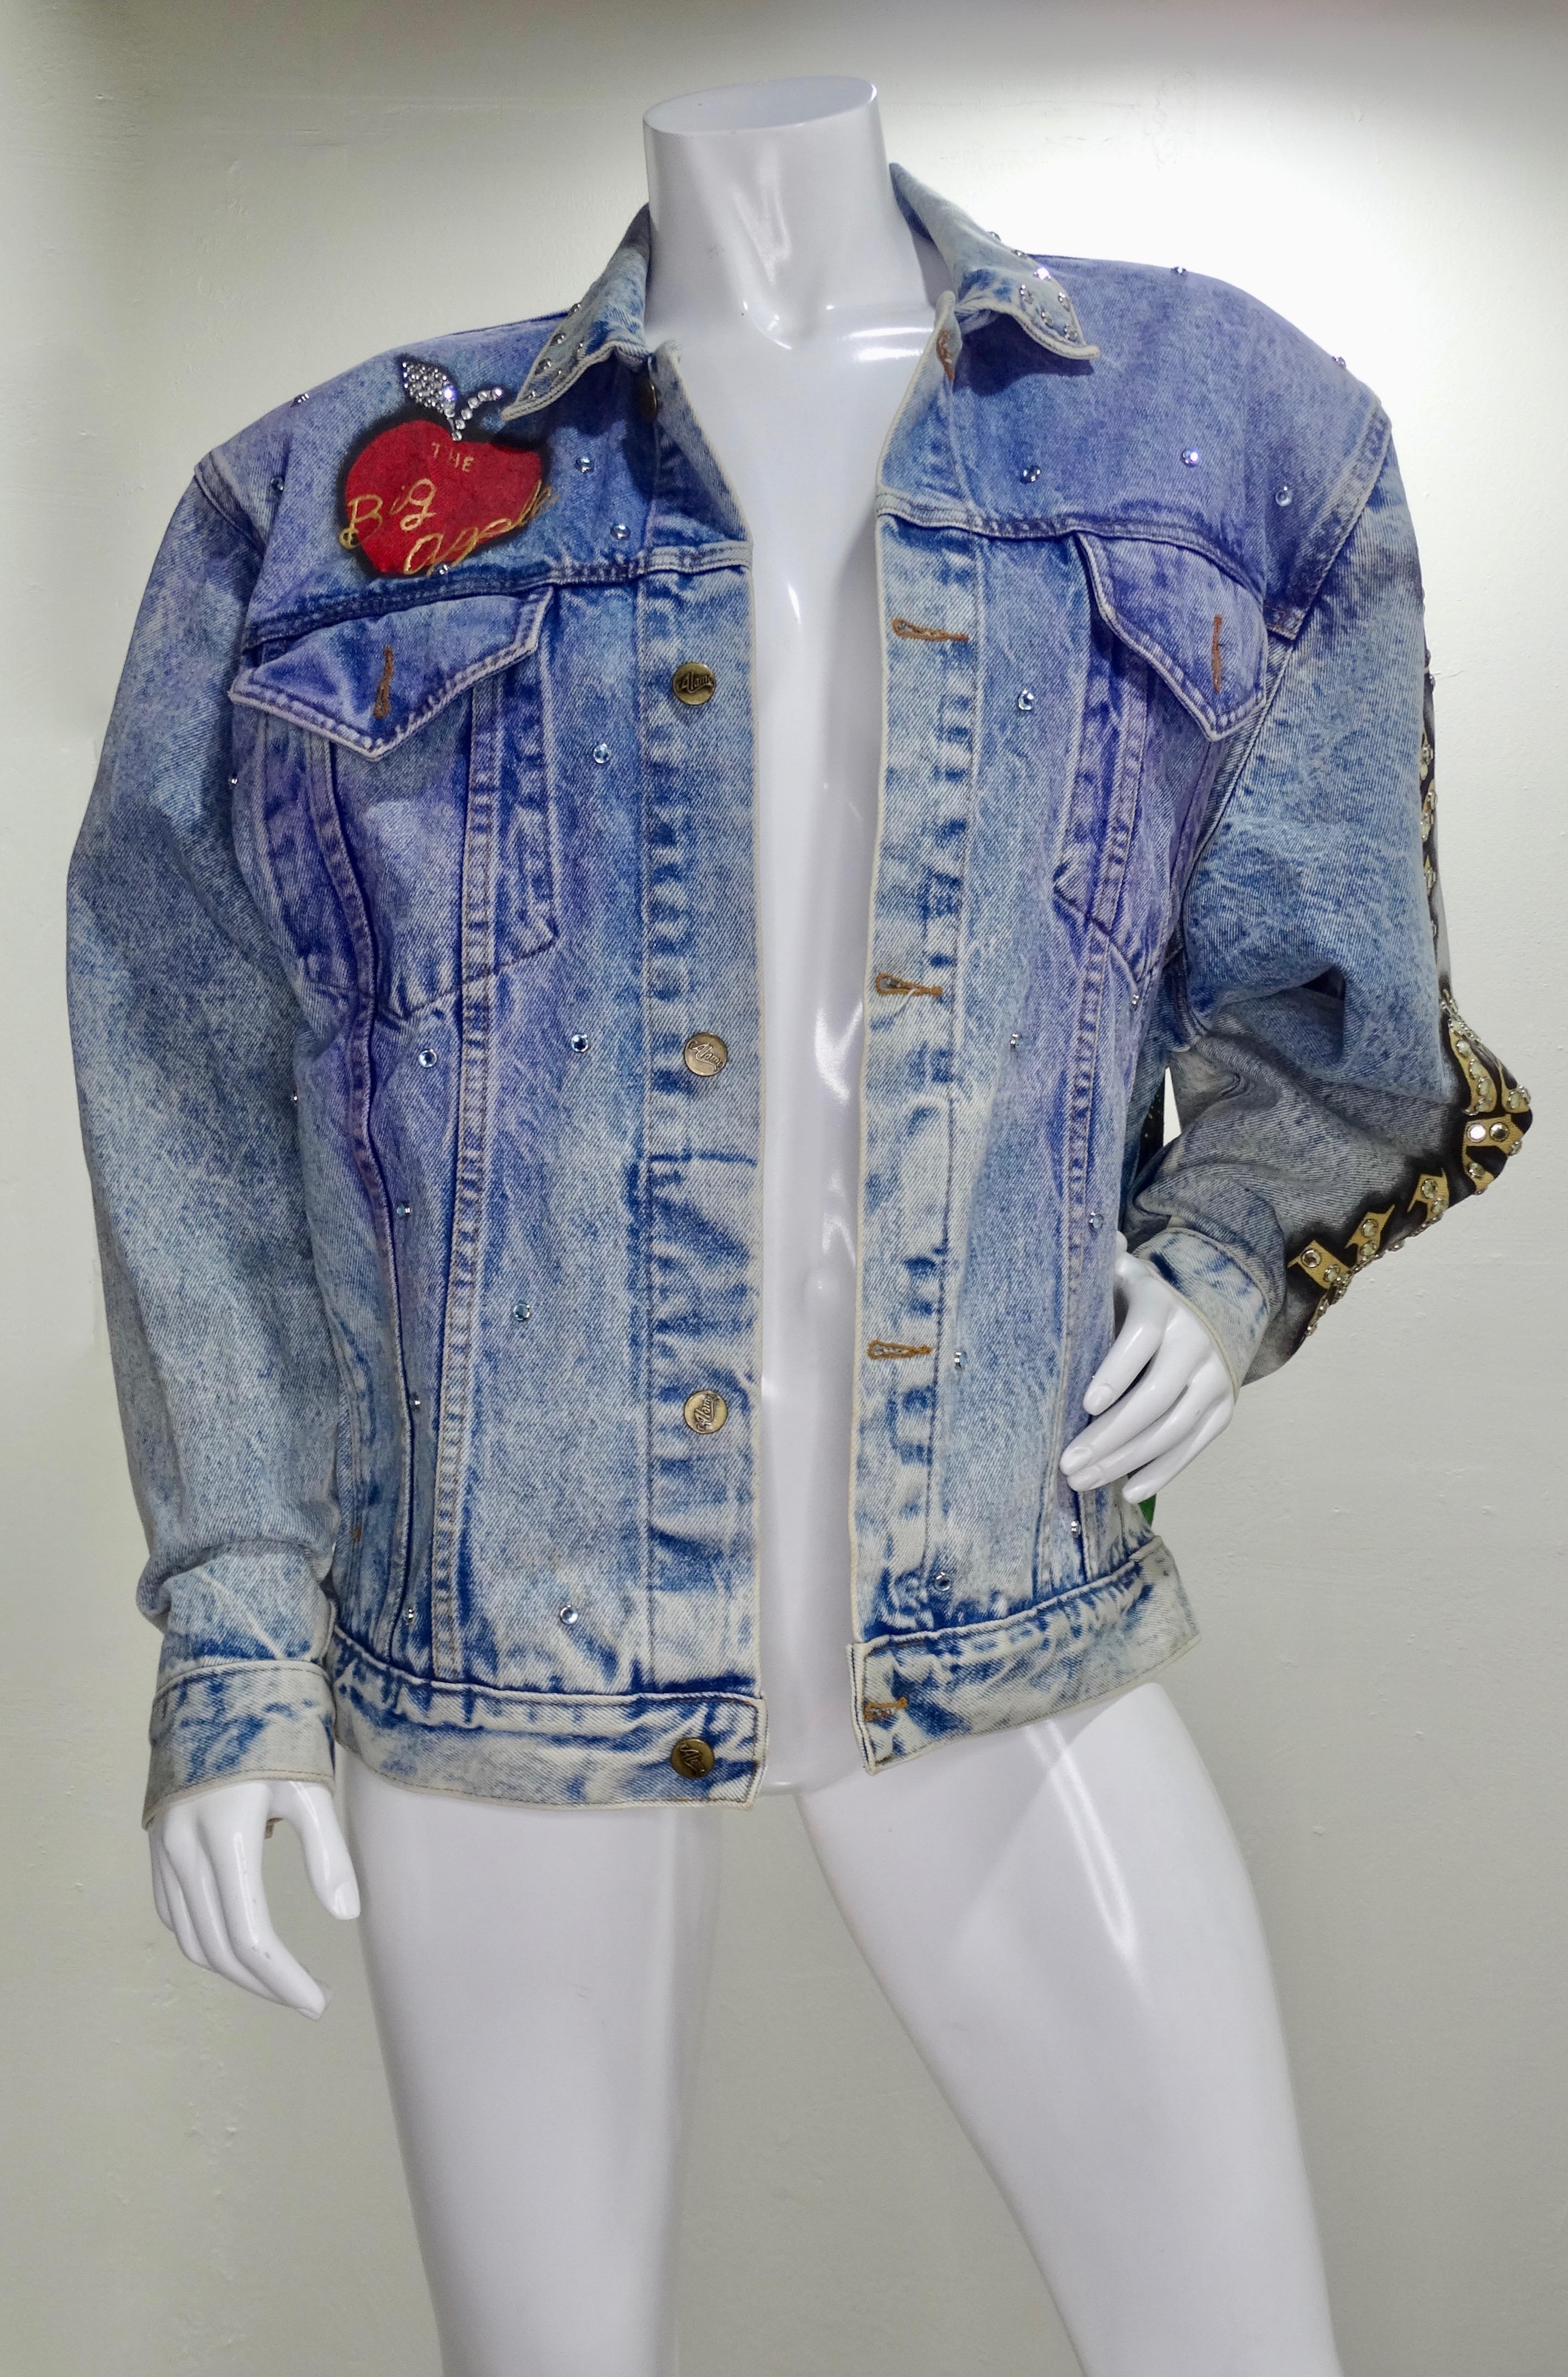 Feel like the ultimate New Yorker with this Tony Alamo jean jacket! Circa 1987, this oversized jean jacket features an acid wash, blue/green/purple airbrushing, brass toned buttons, two front pockets and eye-catching rhinestone embellishing